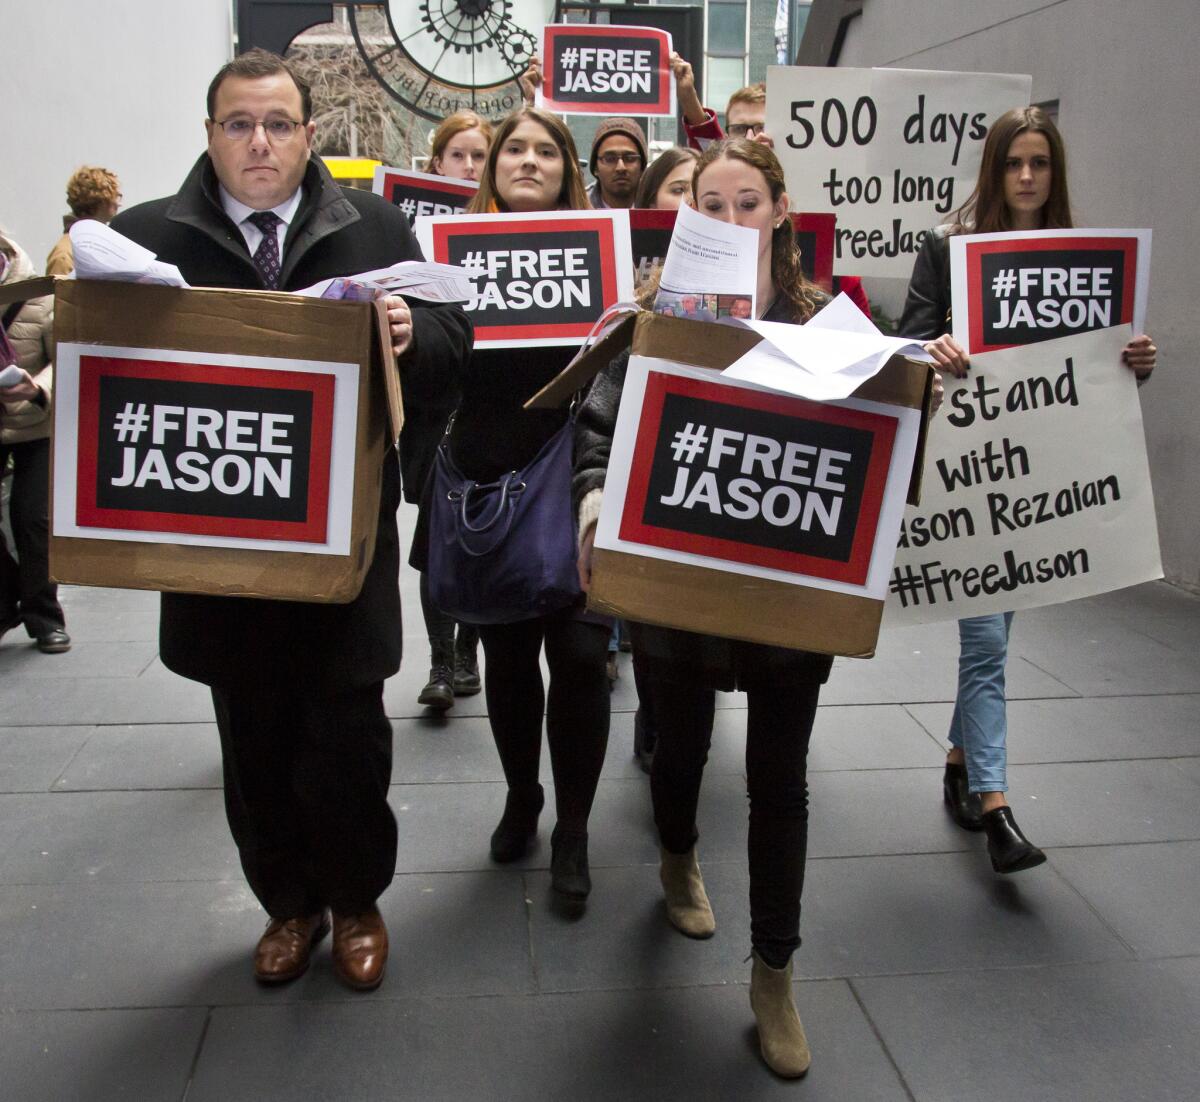 Ali Rezaian, far left, and supporters deliver a petition to Iran's United Nations mission in New York calling for the release of his brother, Washington Post reporter Jason Rezaian.